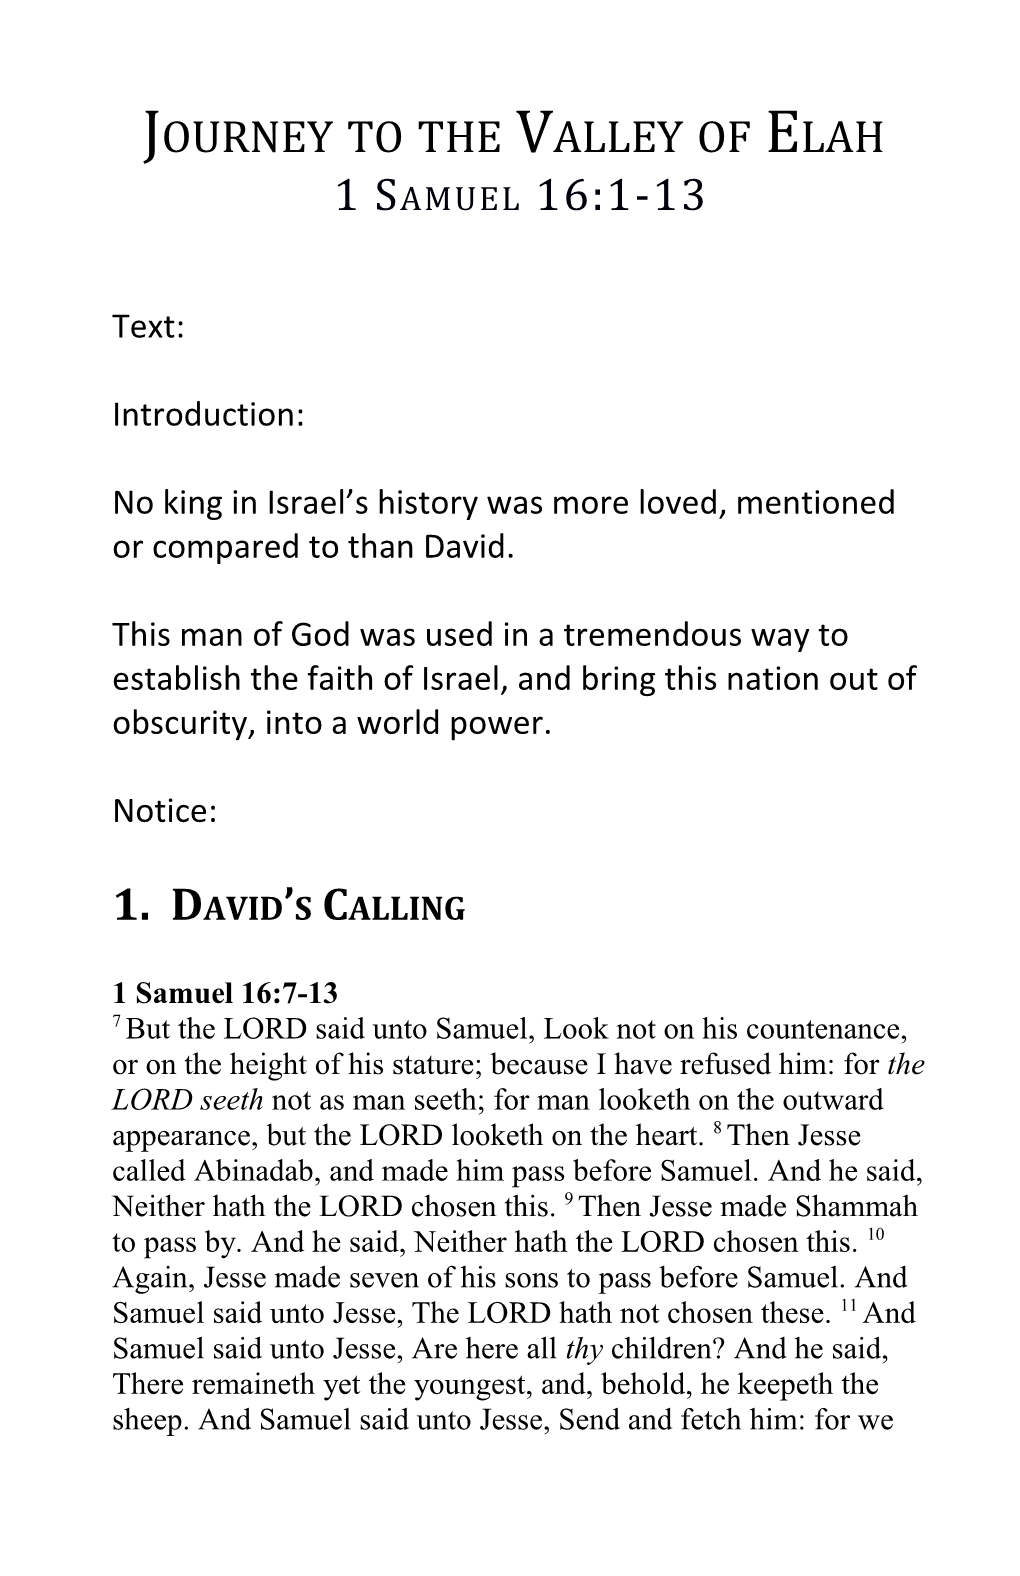 No King in Israel S History Was More Loved, Mentioned Or Compared to Than David